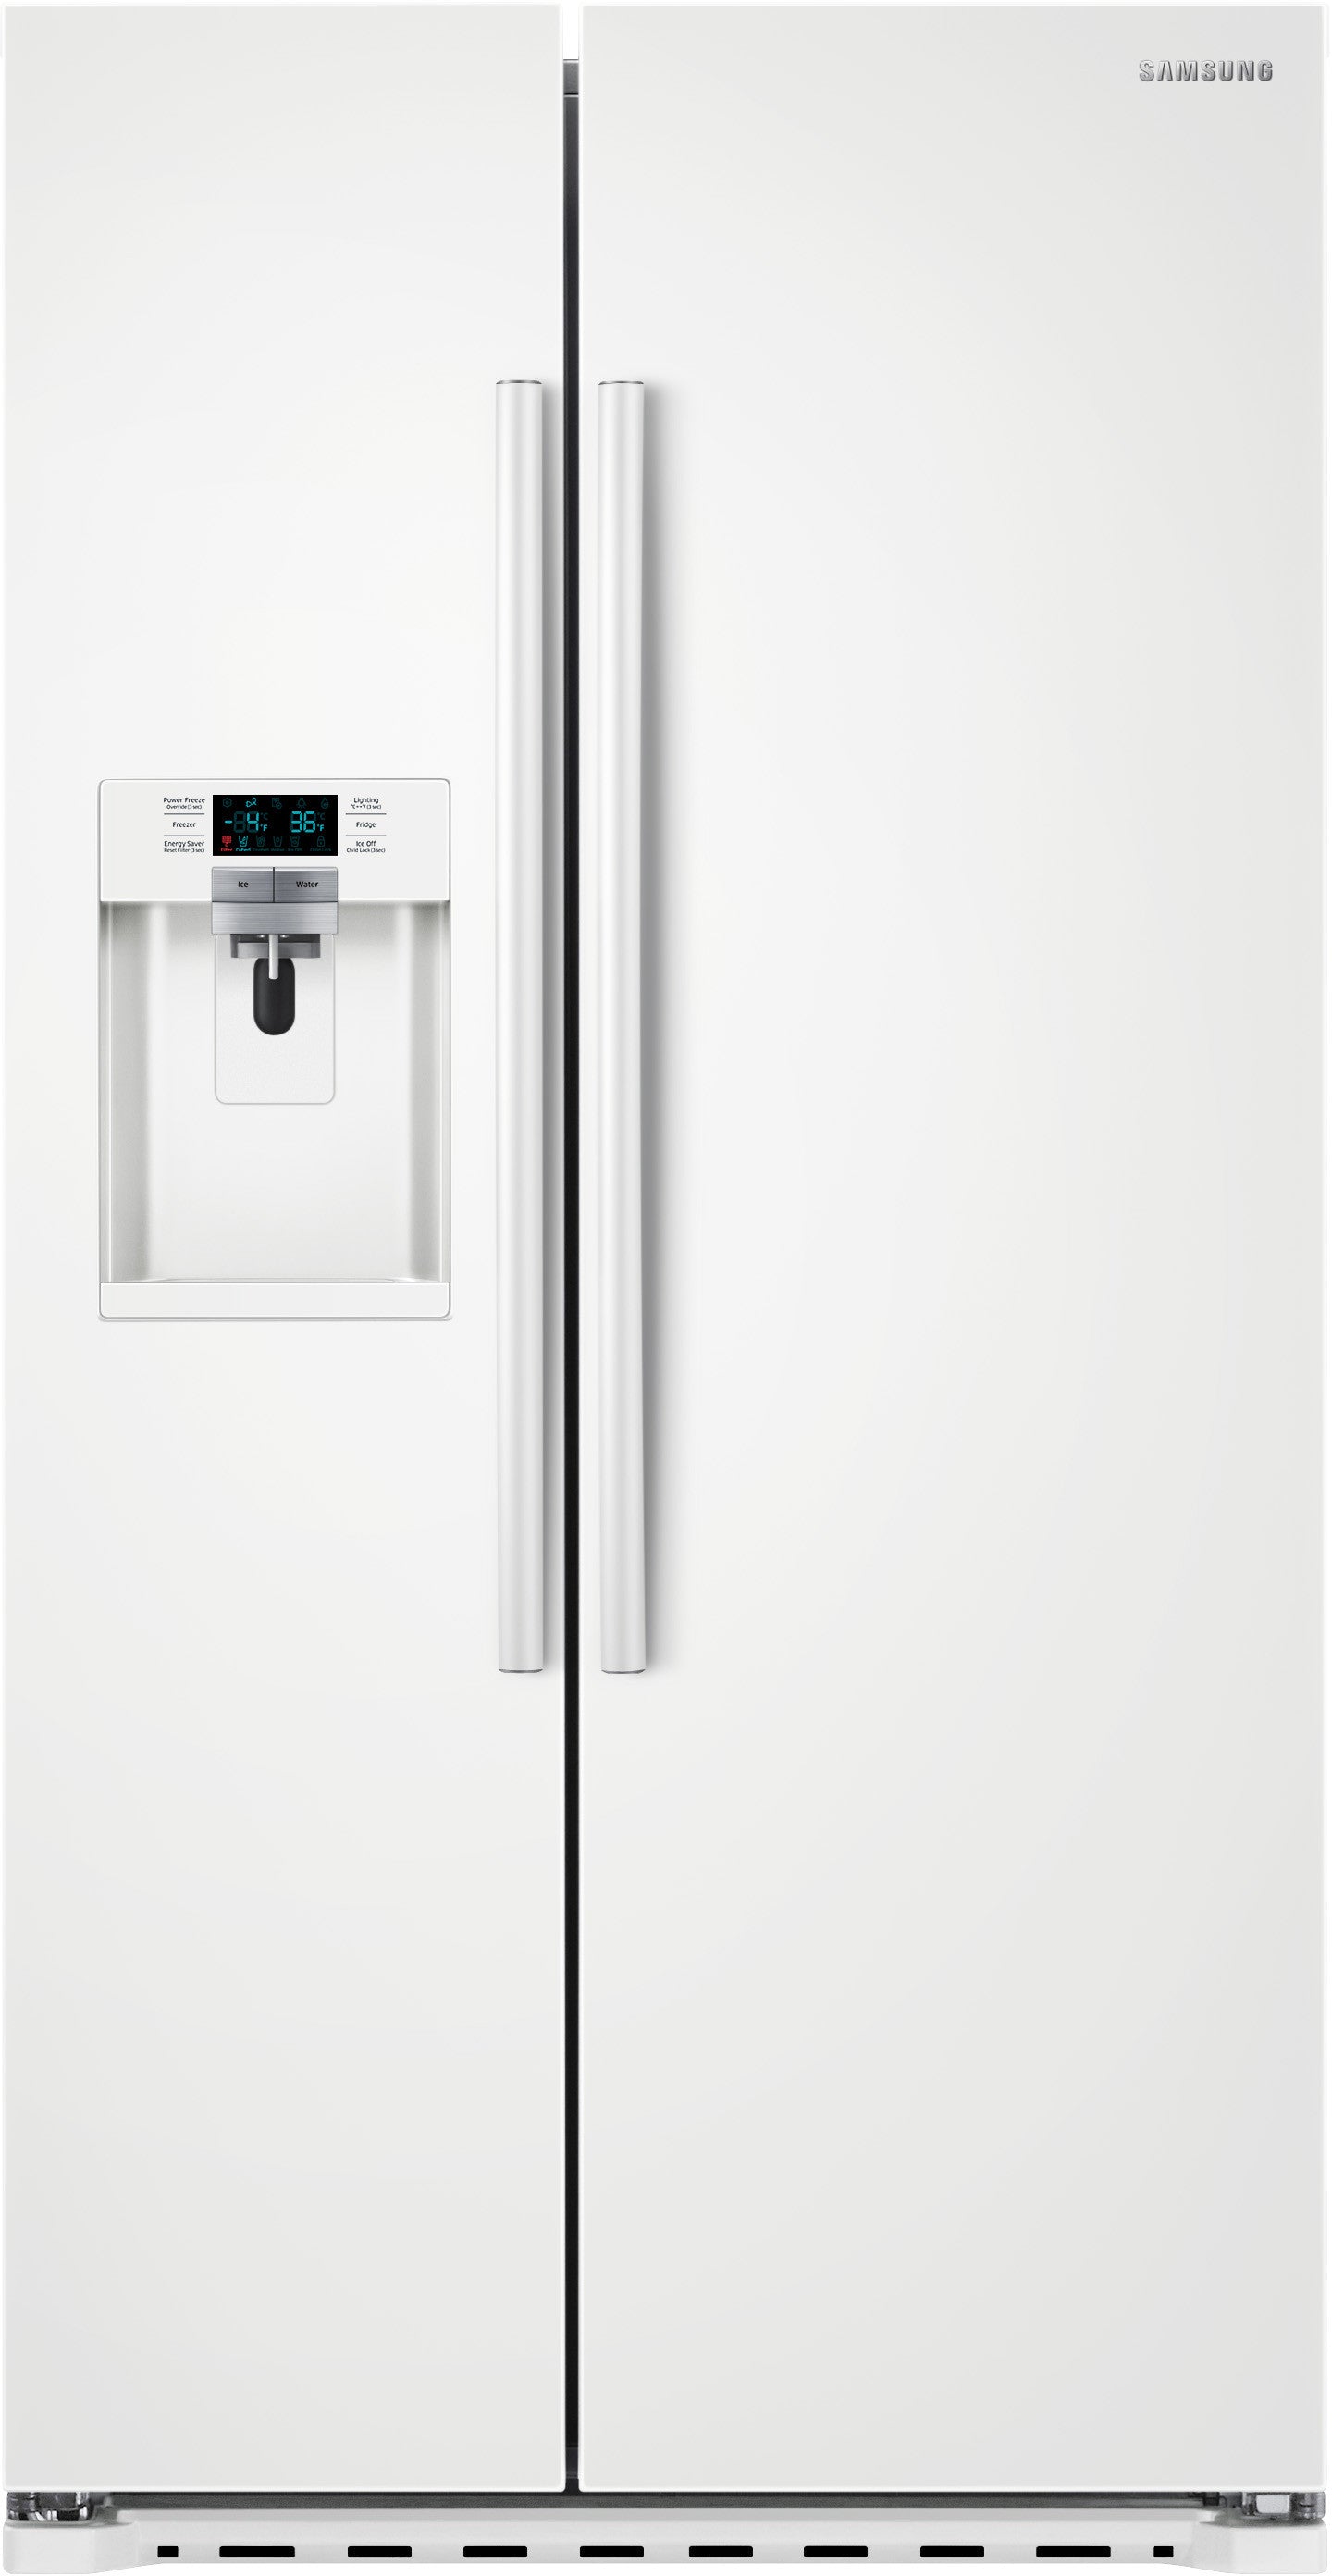 Samsung RS22HDHPNWW/AA 22.3 Cu. Ft. Counter Depth Side-by-side Refrigerator - Samsung Parts USA